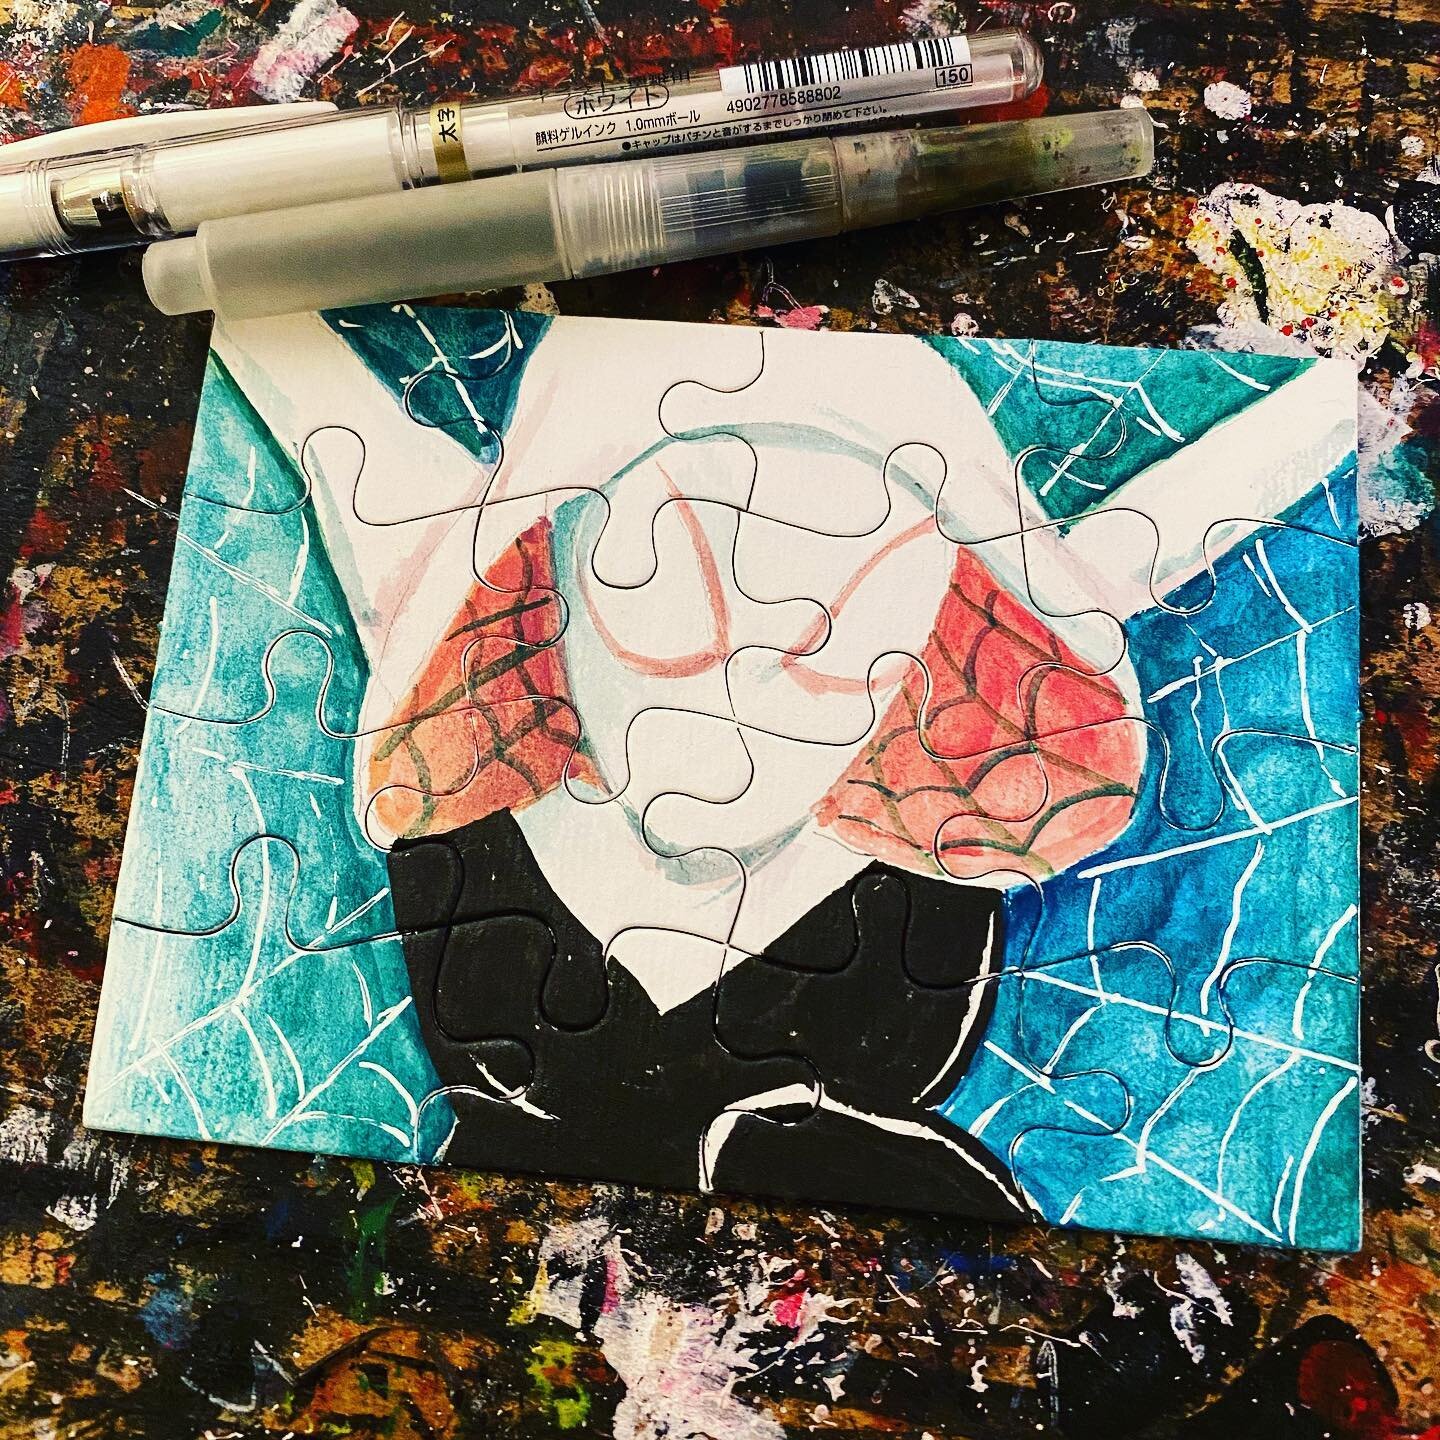 &ldquo;&hellip;let&rsquo;s start at the beginning one last time. My name is #GwenStacy.&rdquo; #SpiderGwen #Spiderverse #puzzleBORED #commission #ink #watercolor